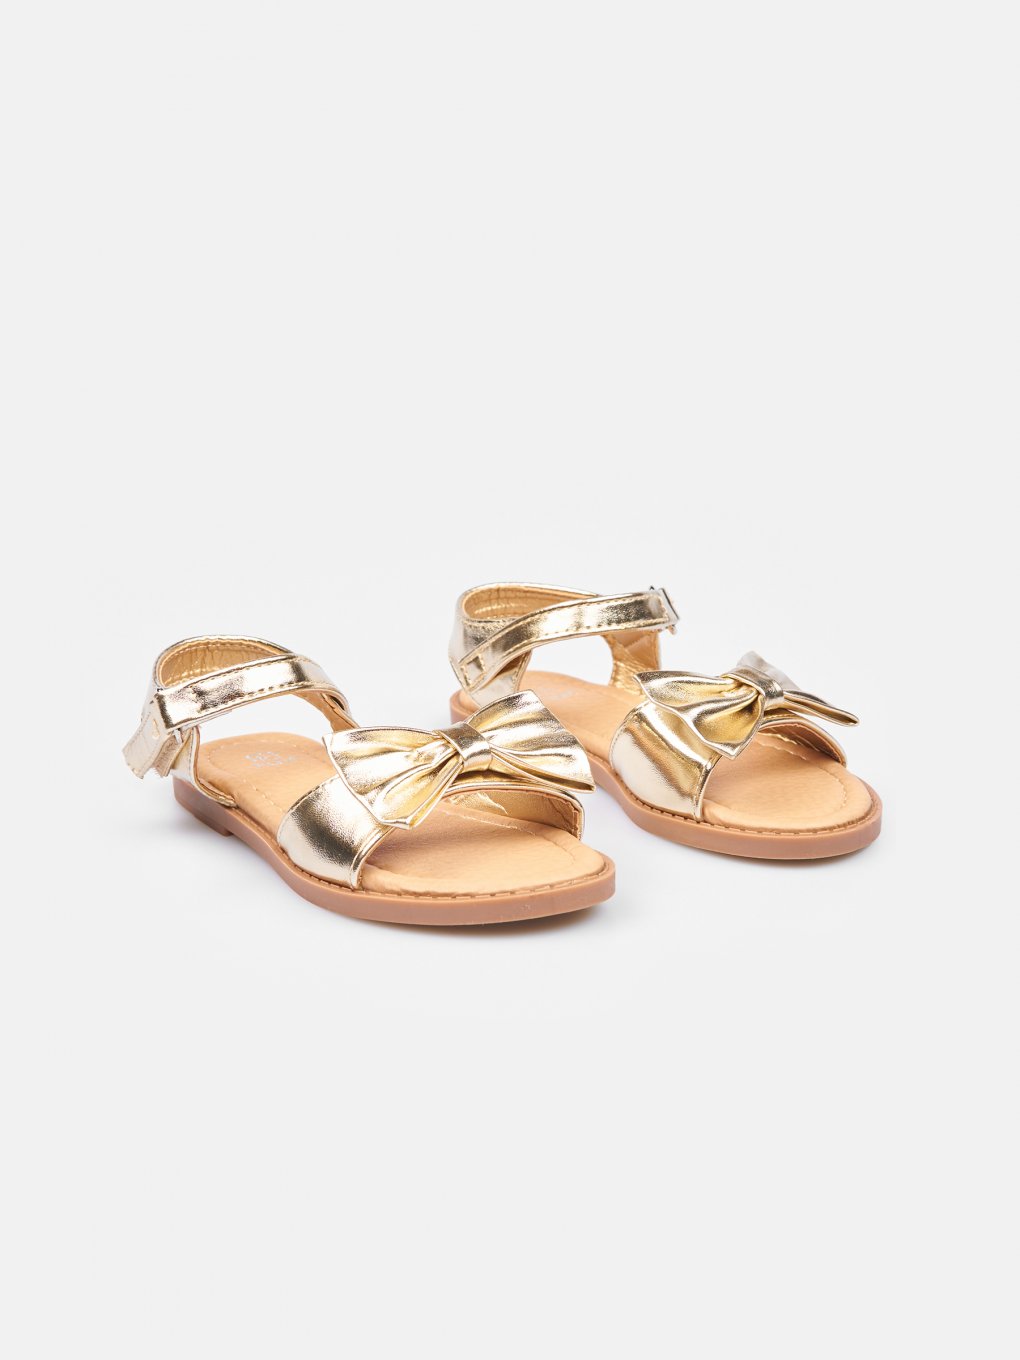 Gold shiny sandals with bow